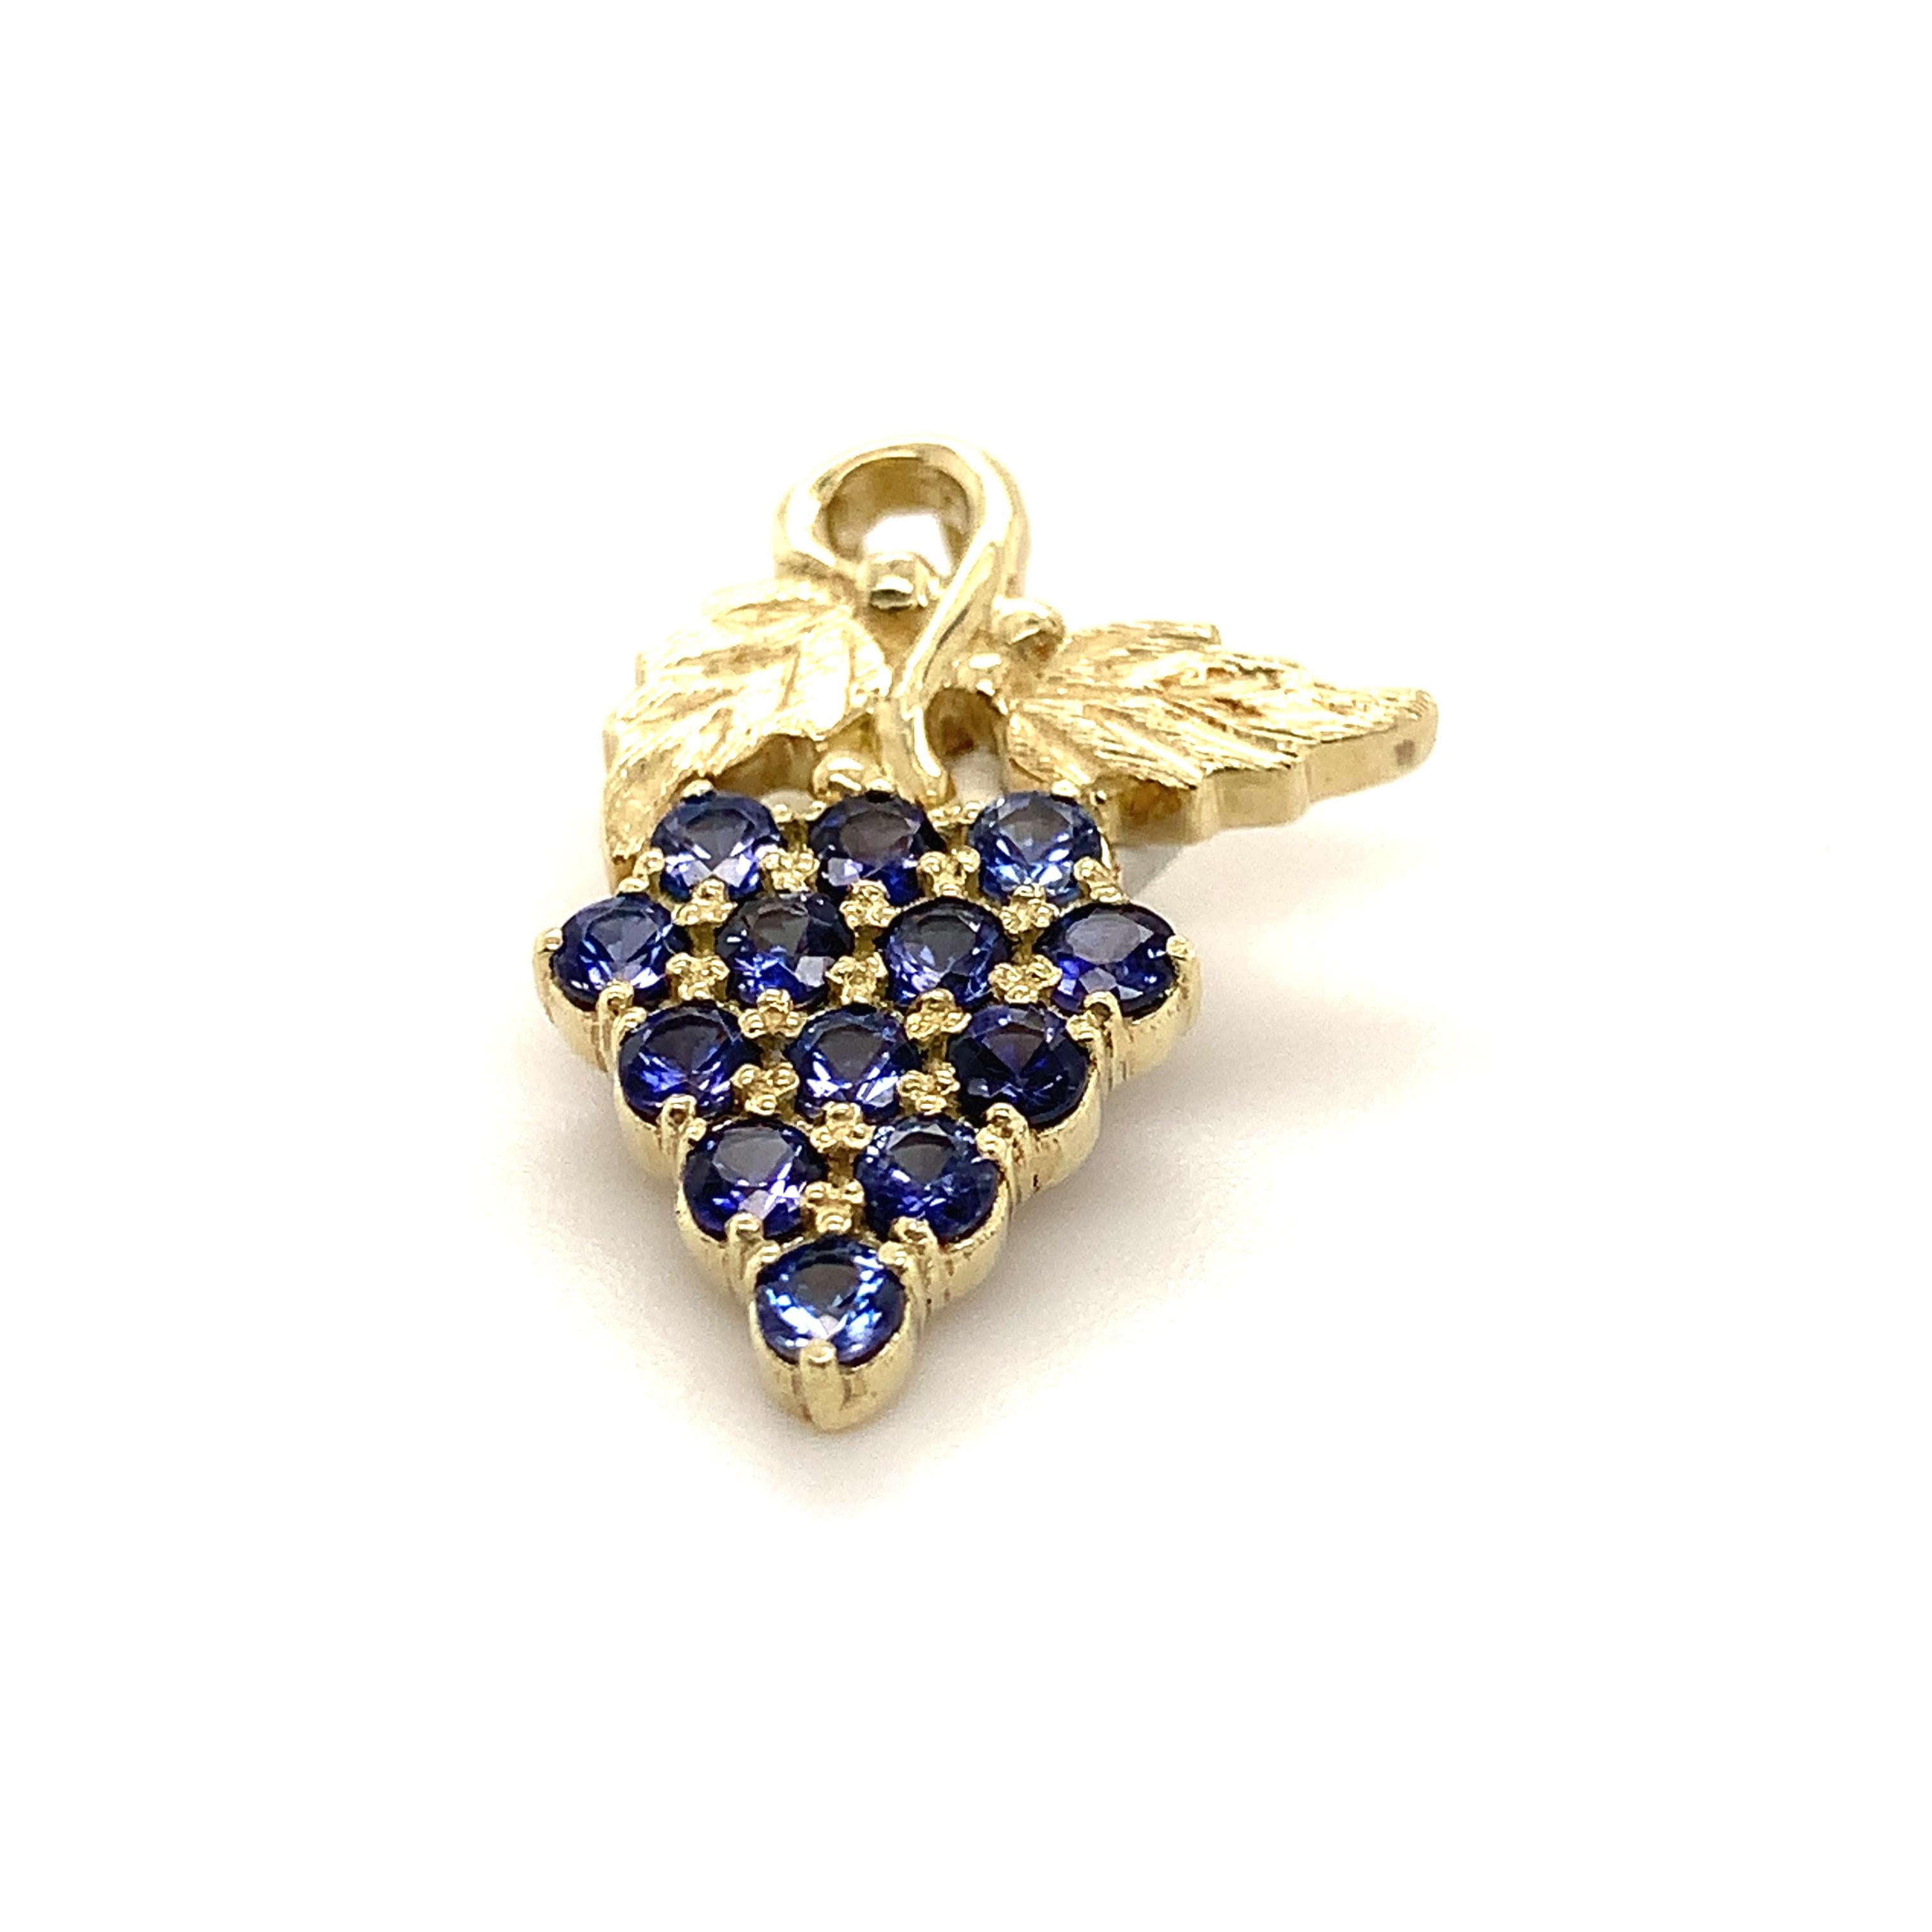 This smaller size grape pendant is done in 14-karat green gold to represent the leaves and the 13 Benitoites represent the grapes and weigh a total of 0.69 carats. 

Benitoite is the California State Gemstone and is one of the 10 rarest stones in